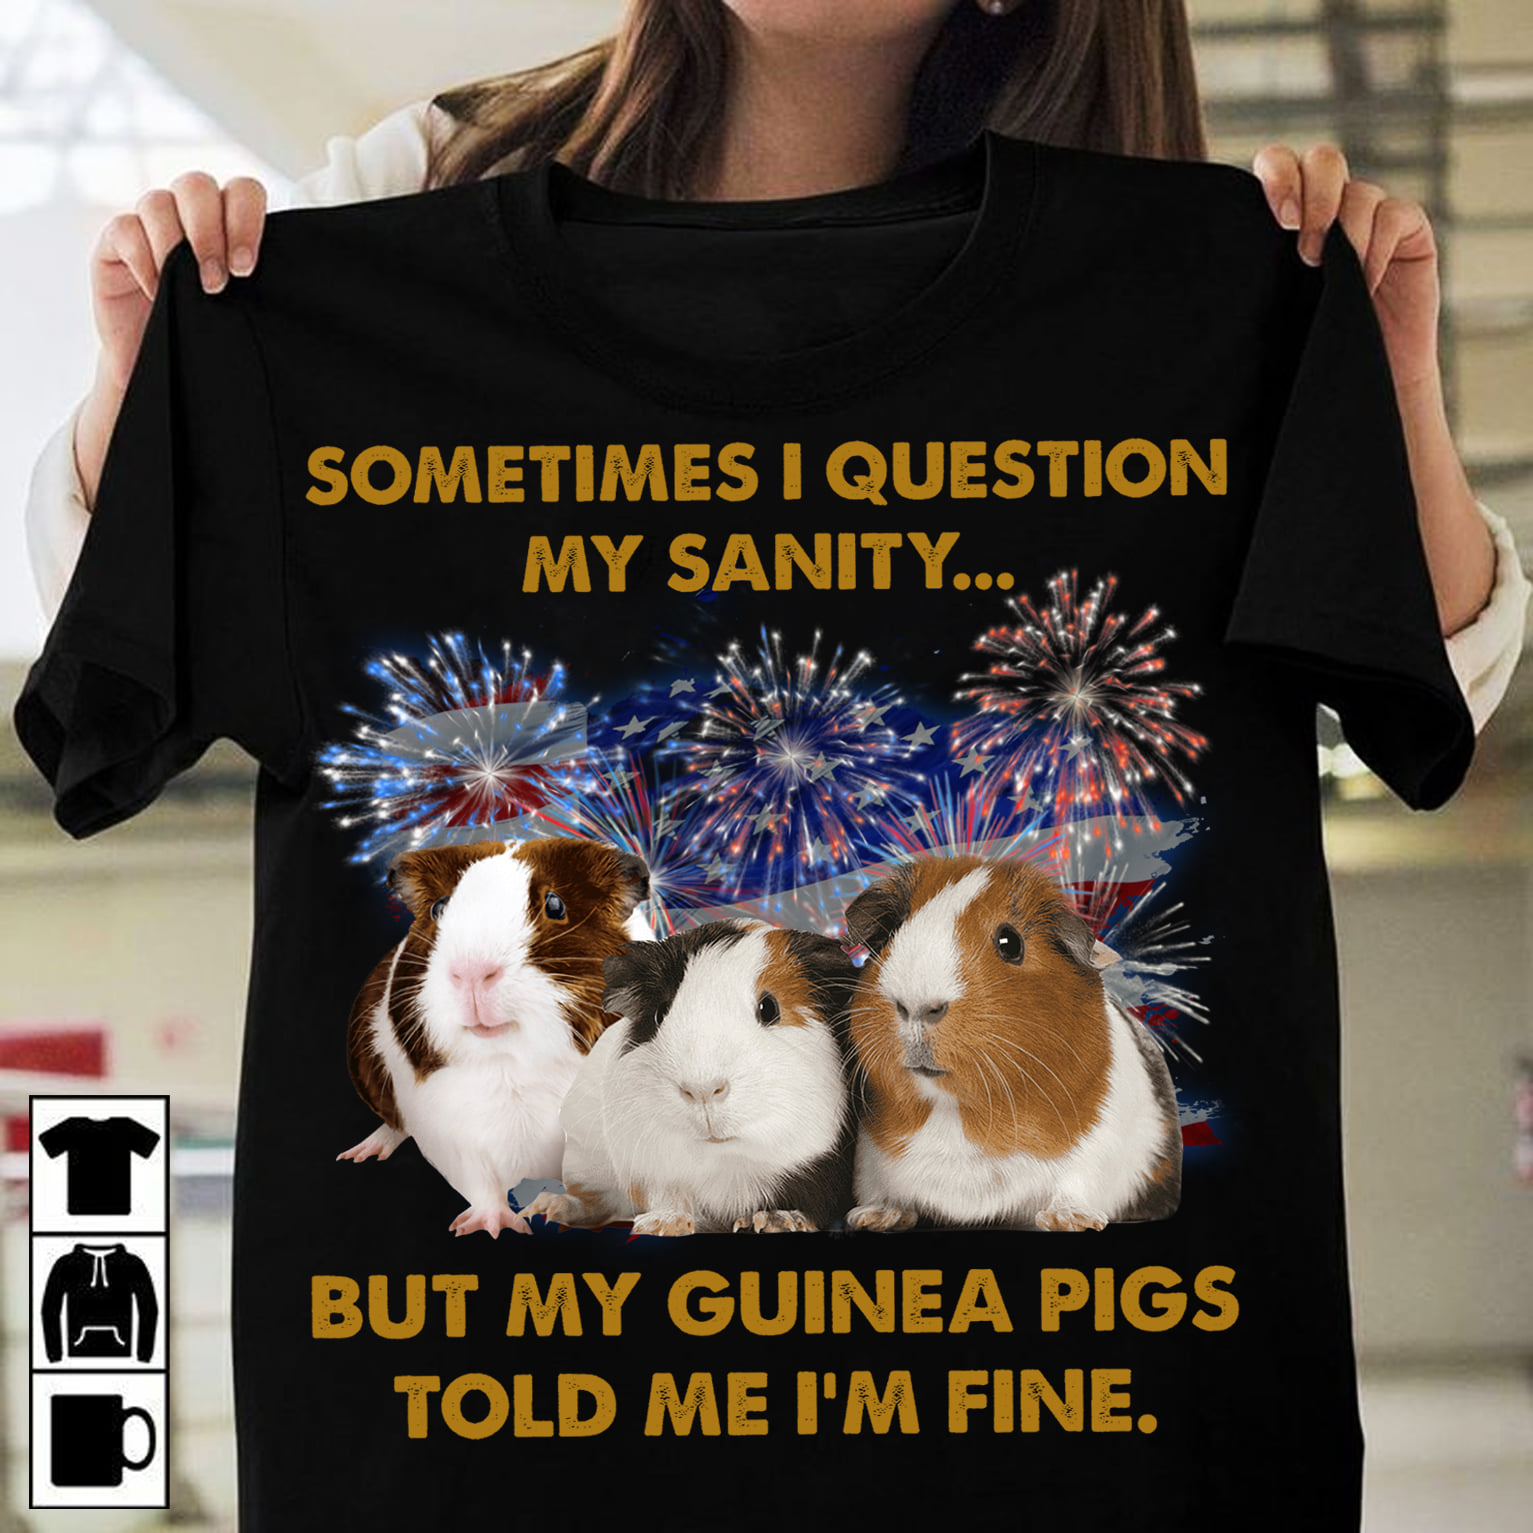 Sometimes I question my sanity but my guinea pigs told me I'm fine